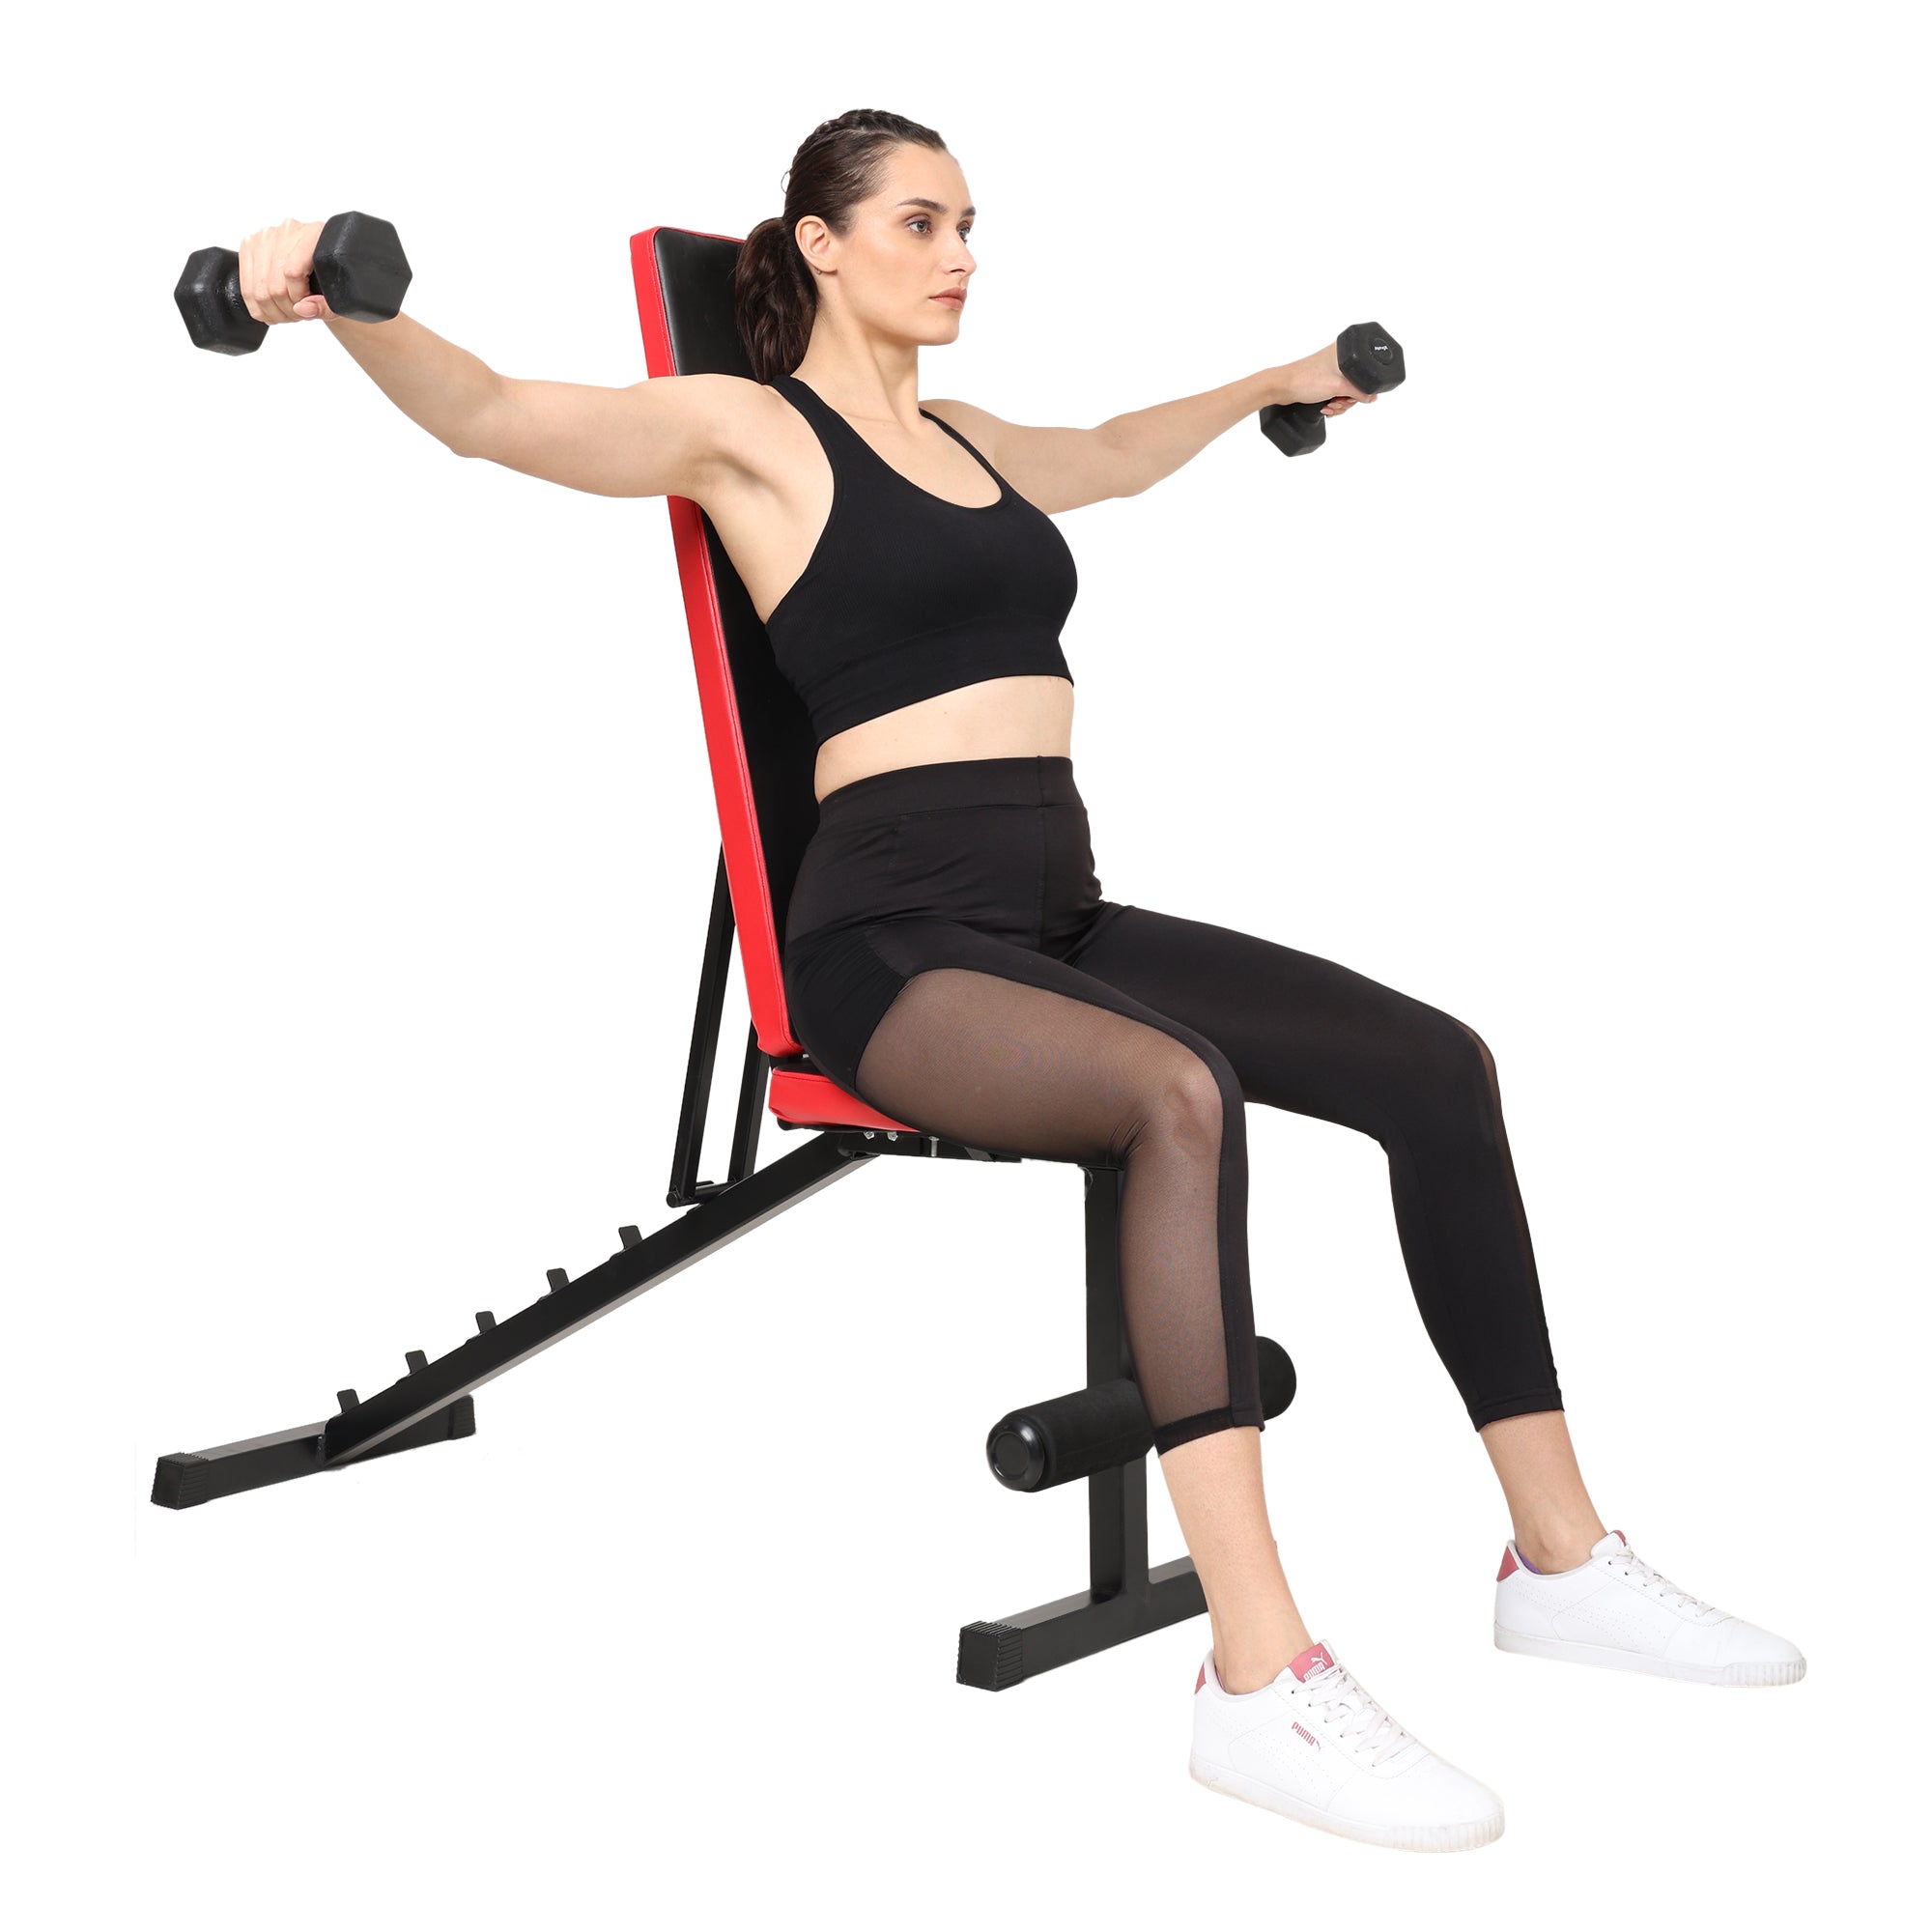 Heavy Duty Adjustable Incline Decline & Flat Workout Bench for Home, Gym, Strength Training, Abdominal and Full Body Workout